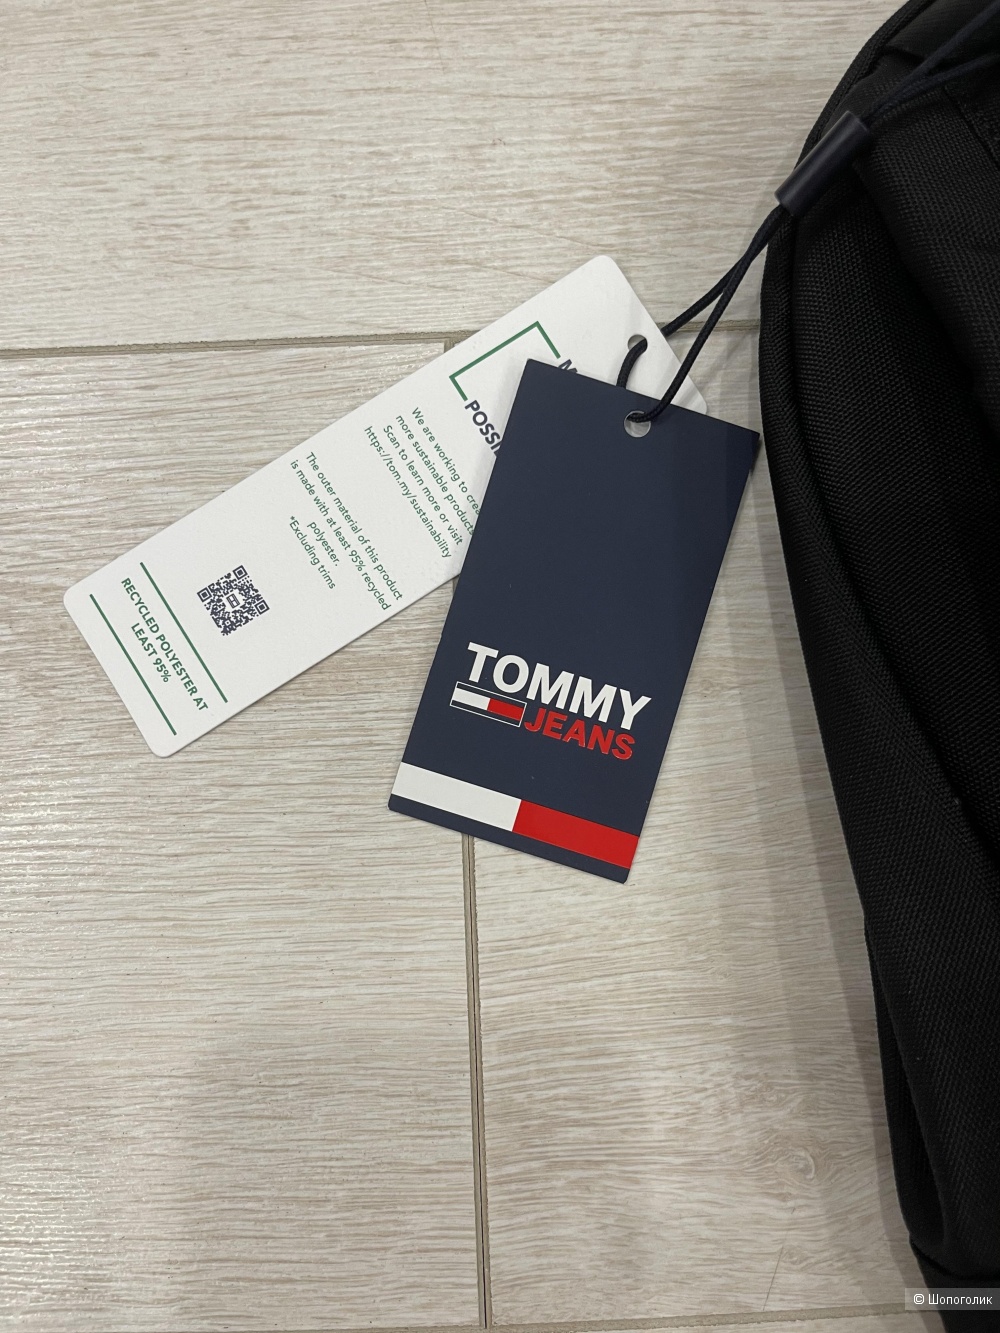 Рюкзак Tommy Jeans one size